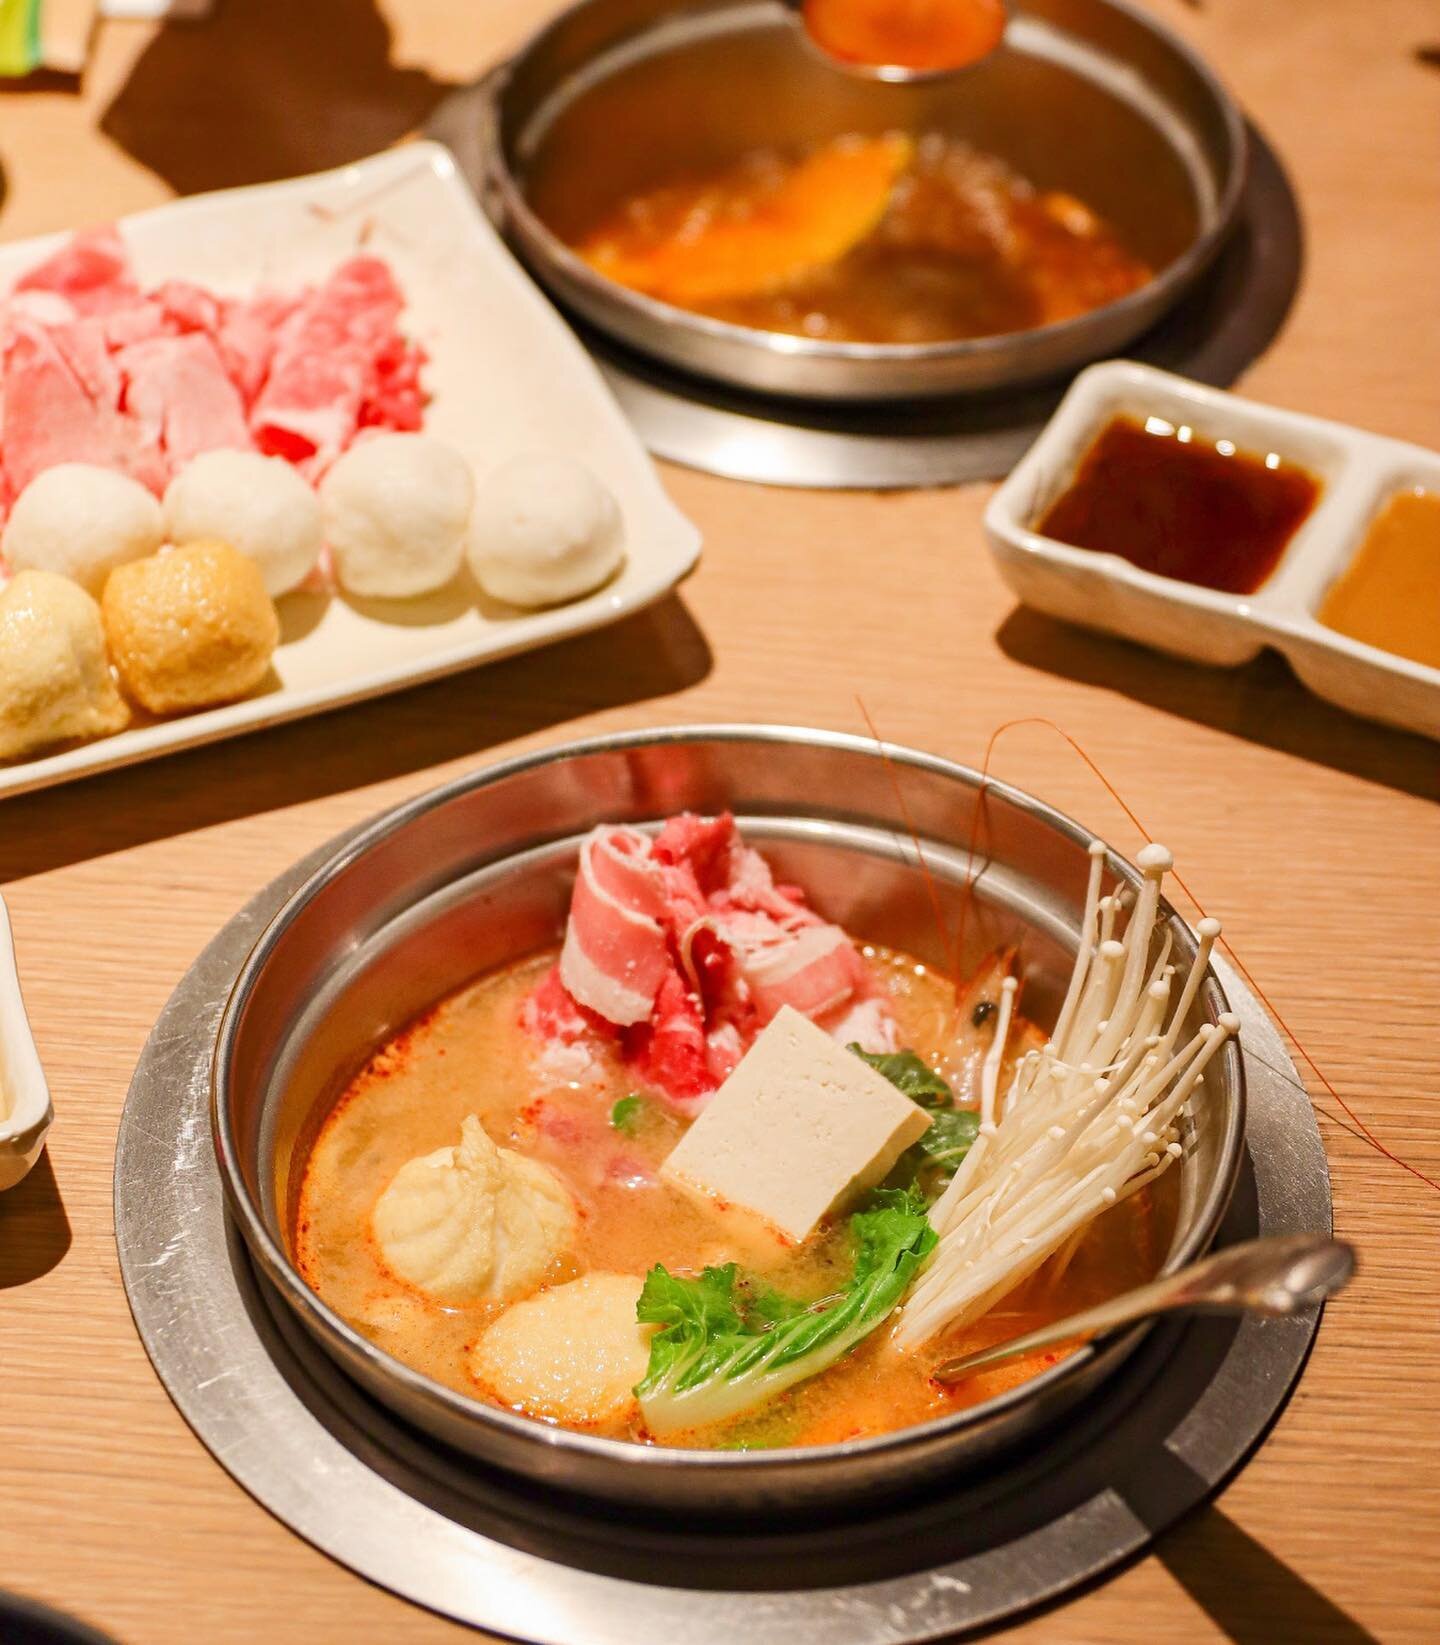 Appreciate the moment when sharing a good Shabu with your family 🍣🥩🥬

🔹Lunch for only $35 Thursday - Monday 12 -3 pm
🔸Dinner open every day 5:30 - 10 pm

Make a reservation
☎️ 07 3211 5407
1/70 Mary St, Brisbane City QLD 4000
#shabuhouse #shabub